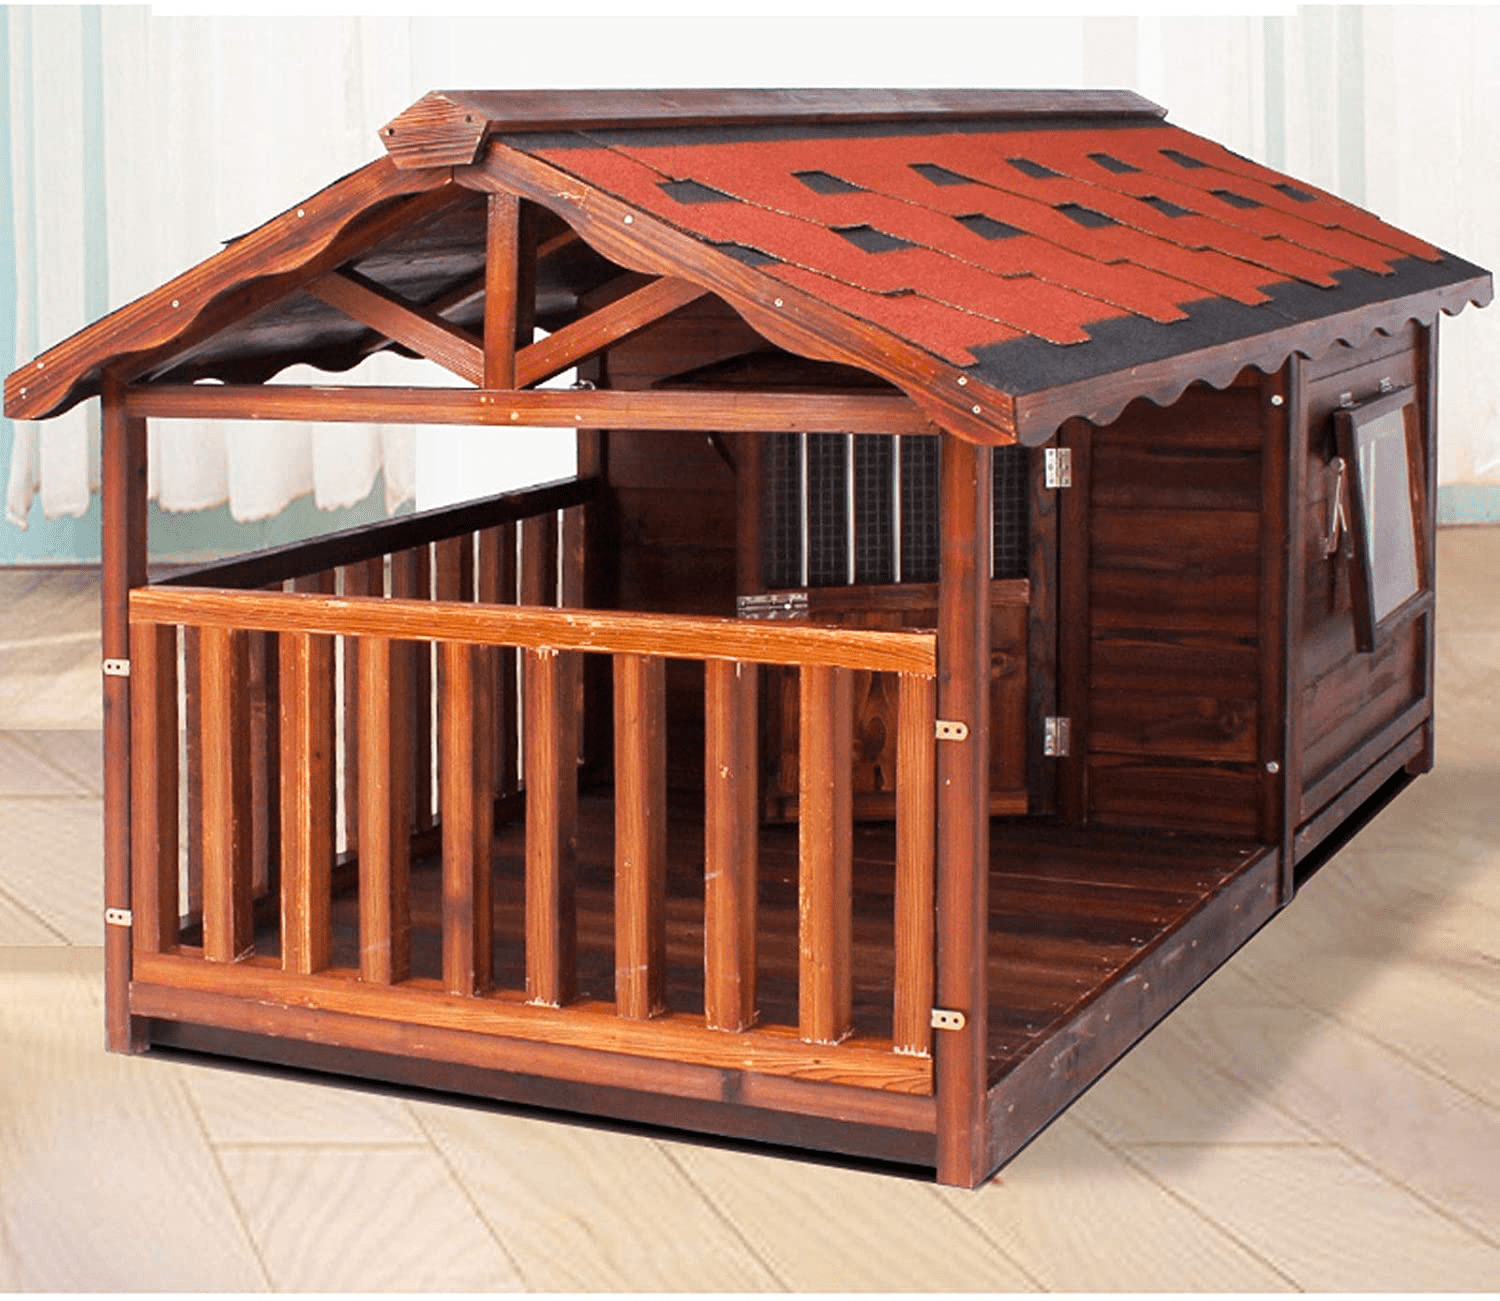 XIAOSAKU Pet Beds for Cats and Dogs Modern Design Dog House,With Door and Window, Medium and Large Crate Indoor Use, Chew-Proof Pet Supplies